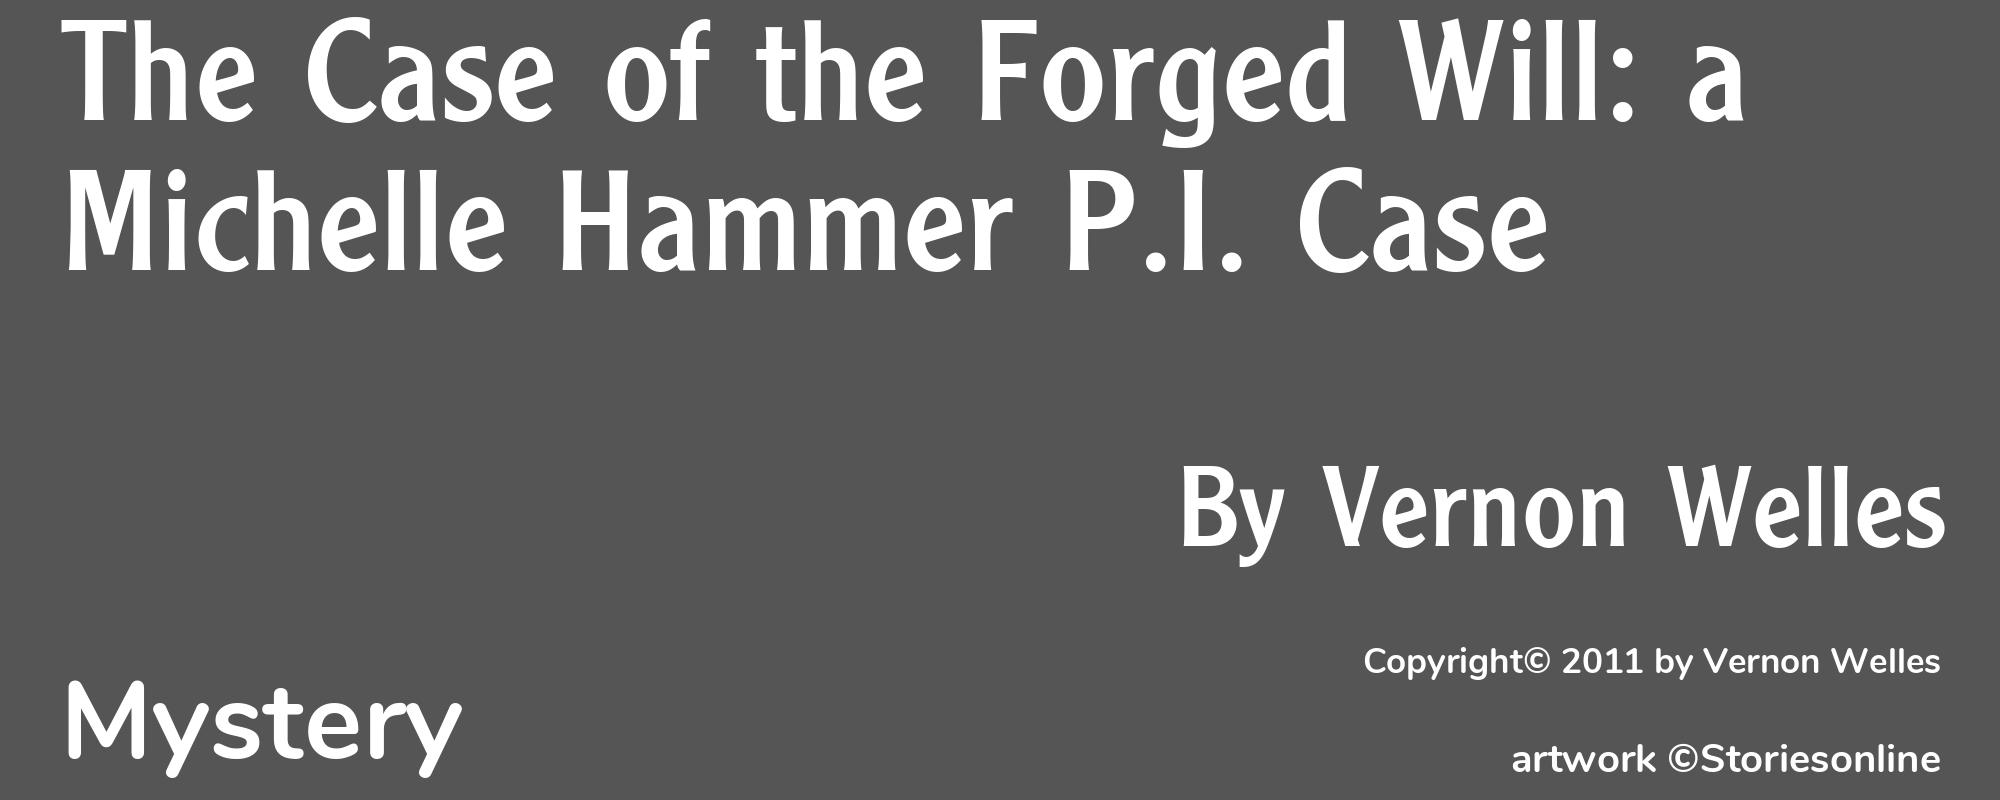 The Case of the Forged Will: a Michelle Hammer P.I. Case - Cover